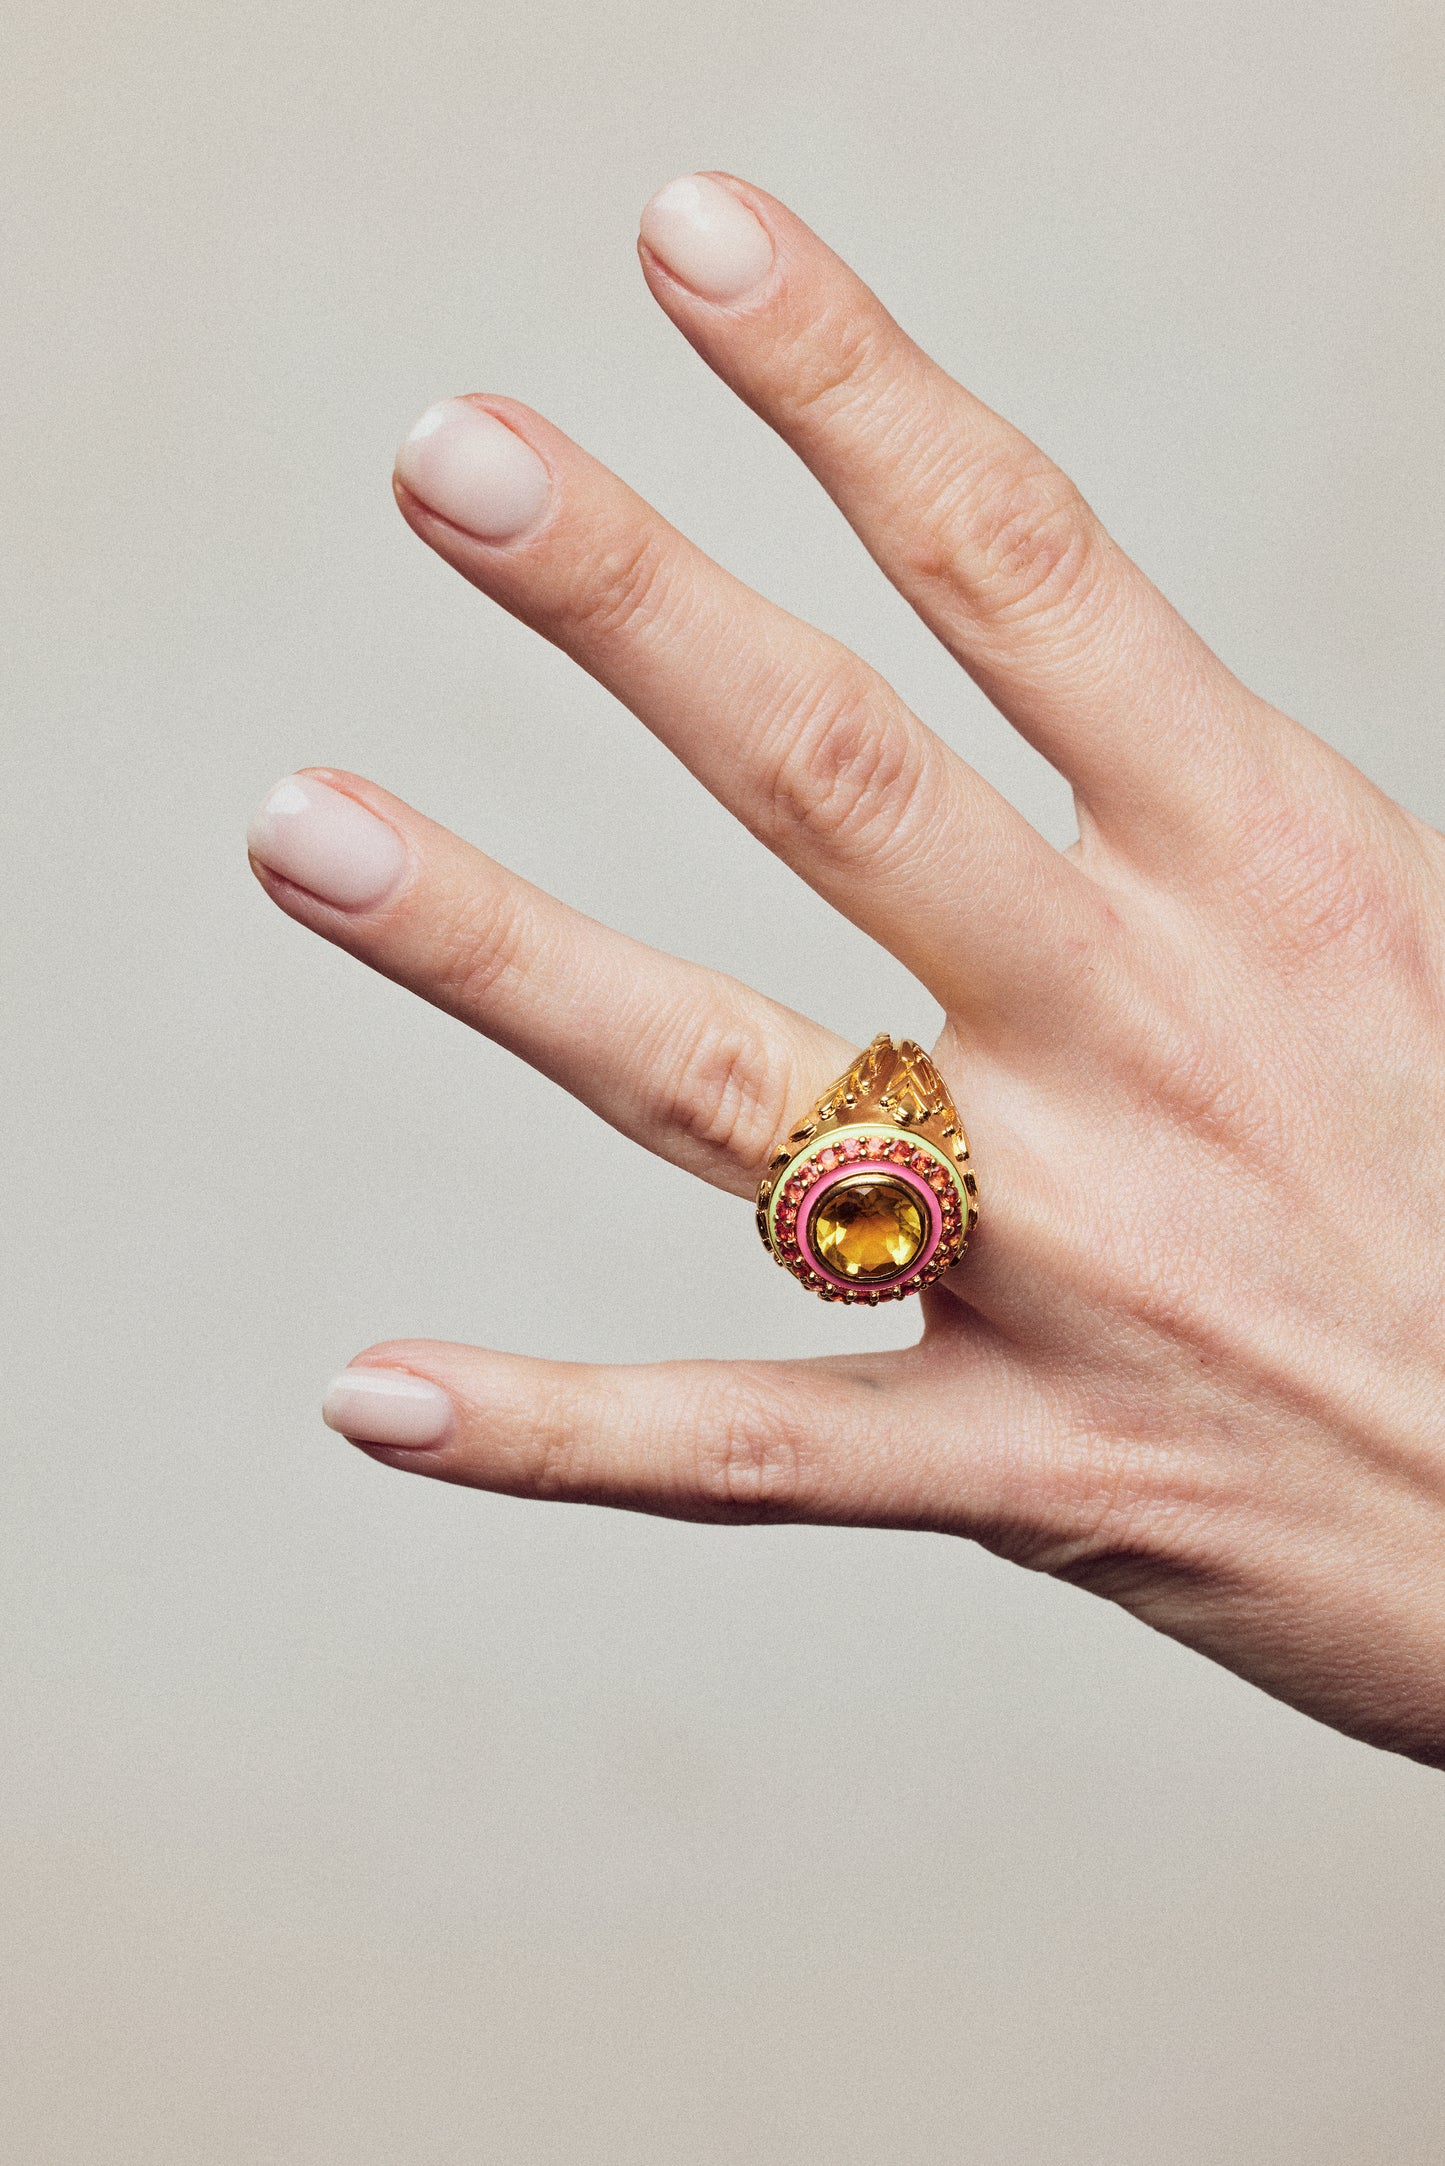 image of firework statement ring in orange and gold on hand with outstreched fingers